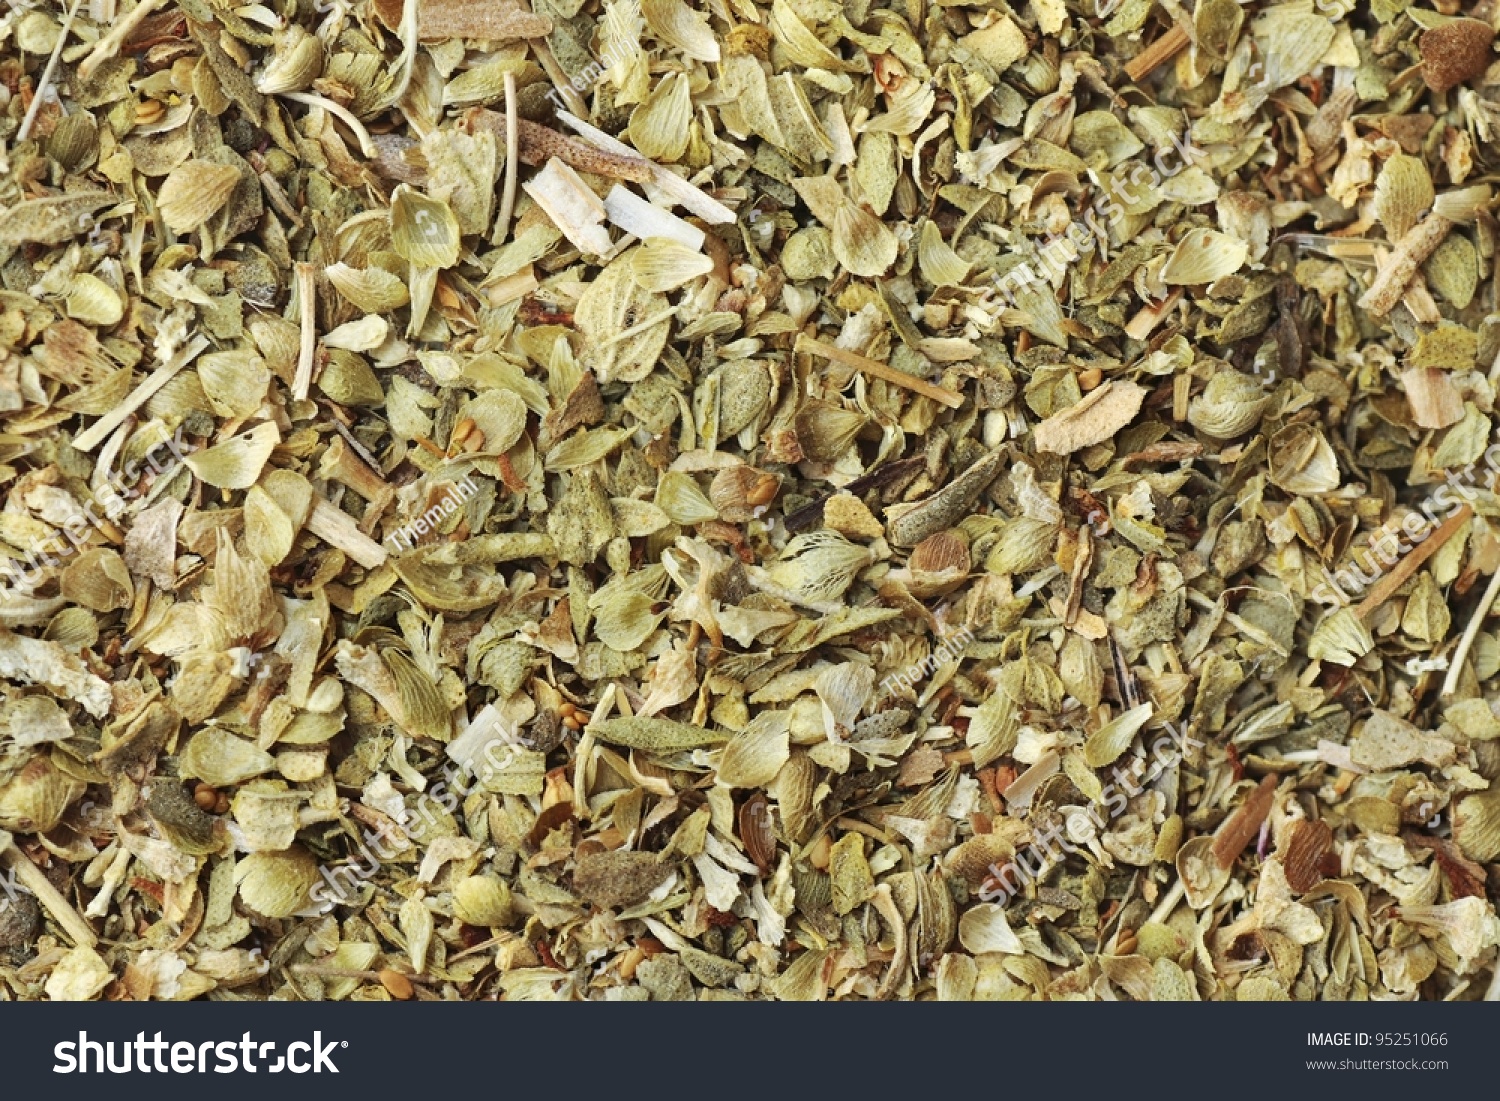 Close Up Of Dried Oregano Leaves With Other Spices Stock ...